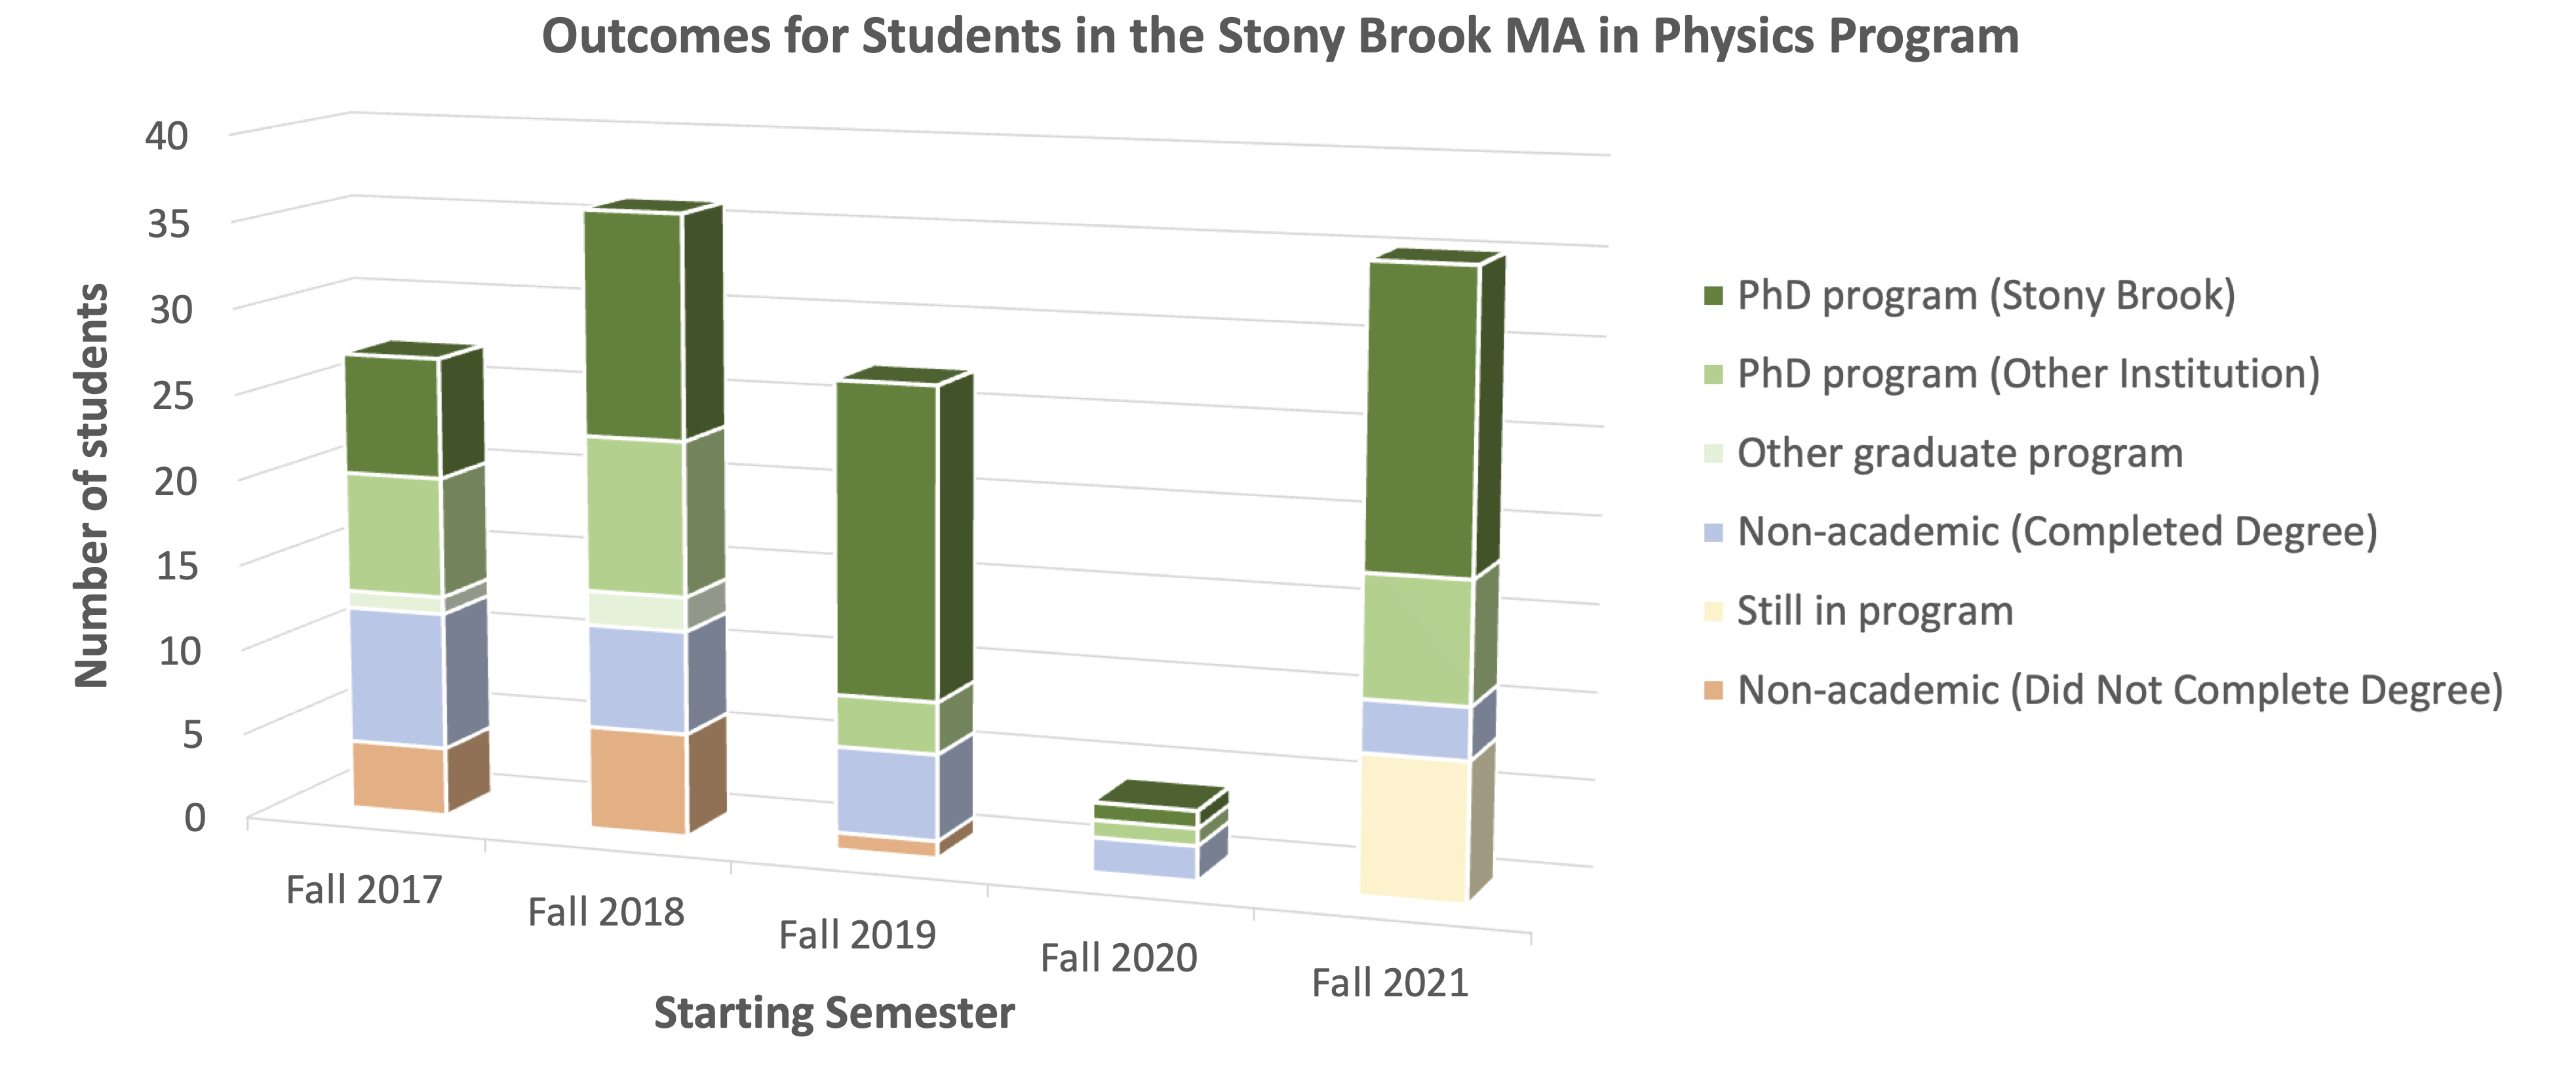 Outcomes for 5 years of the MA in Physics Program